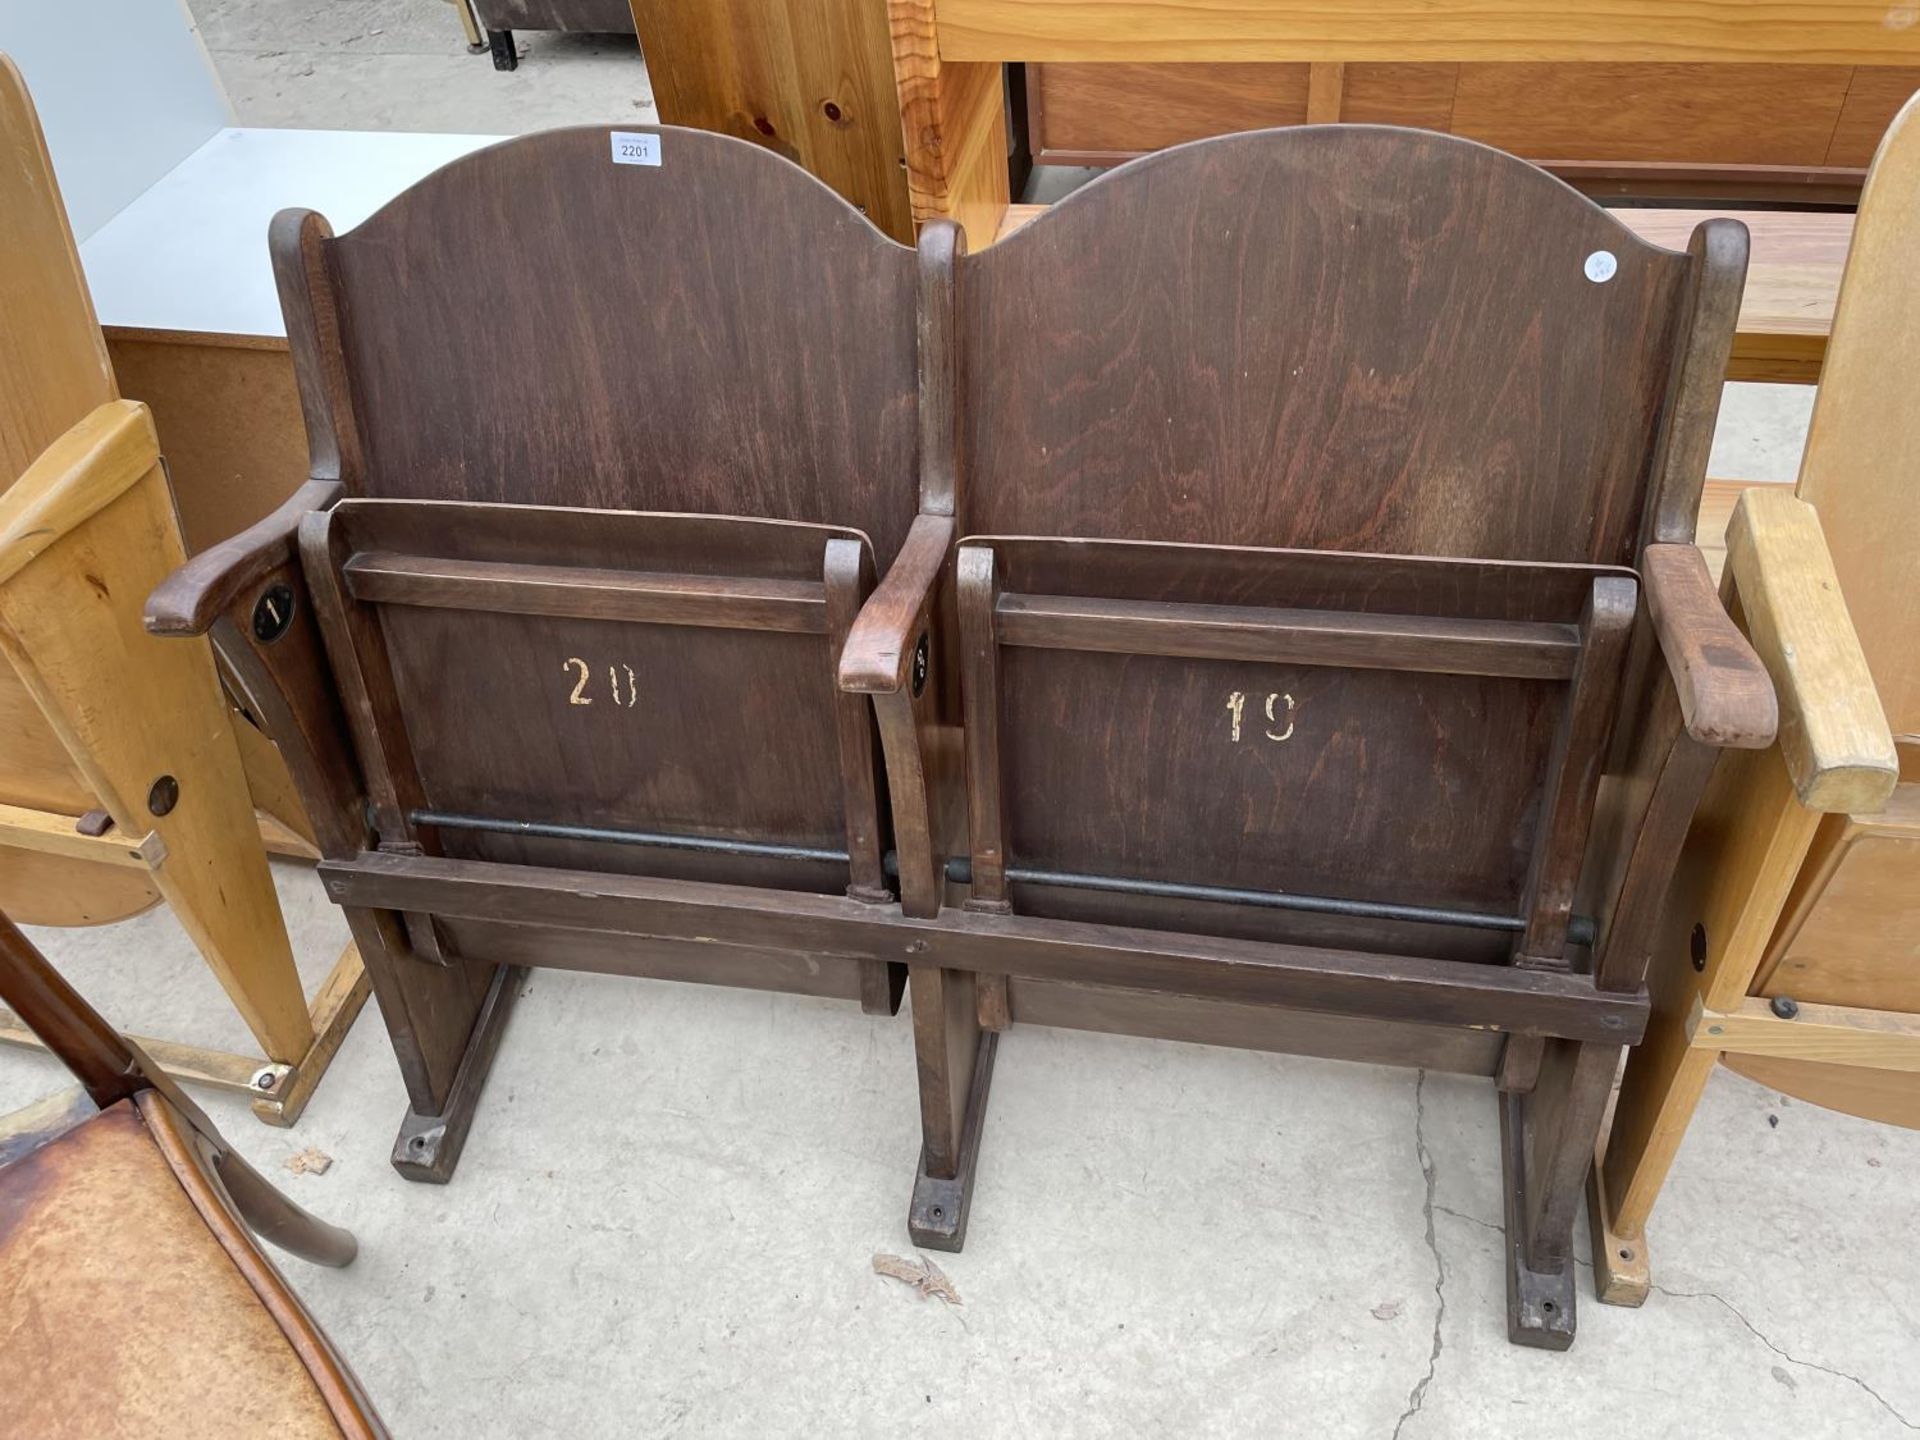 A PAIR OF BENTWOOD CINEMA/THEATRE SEATS, NO.20 AND NO.19